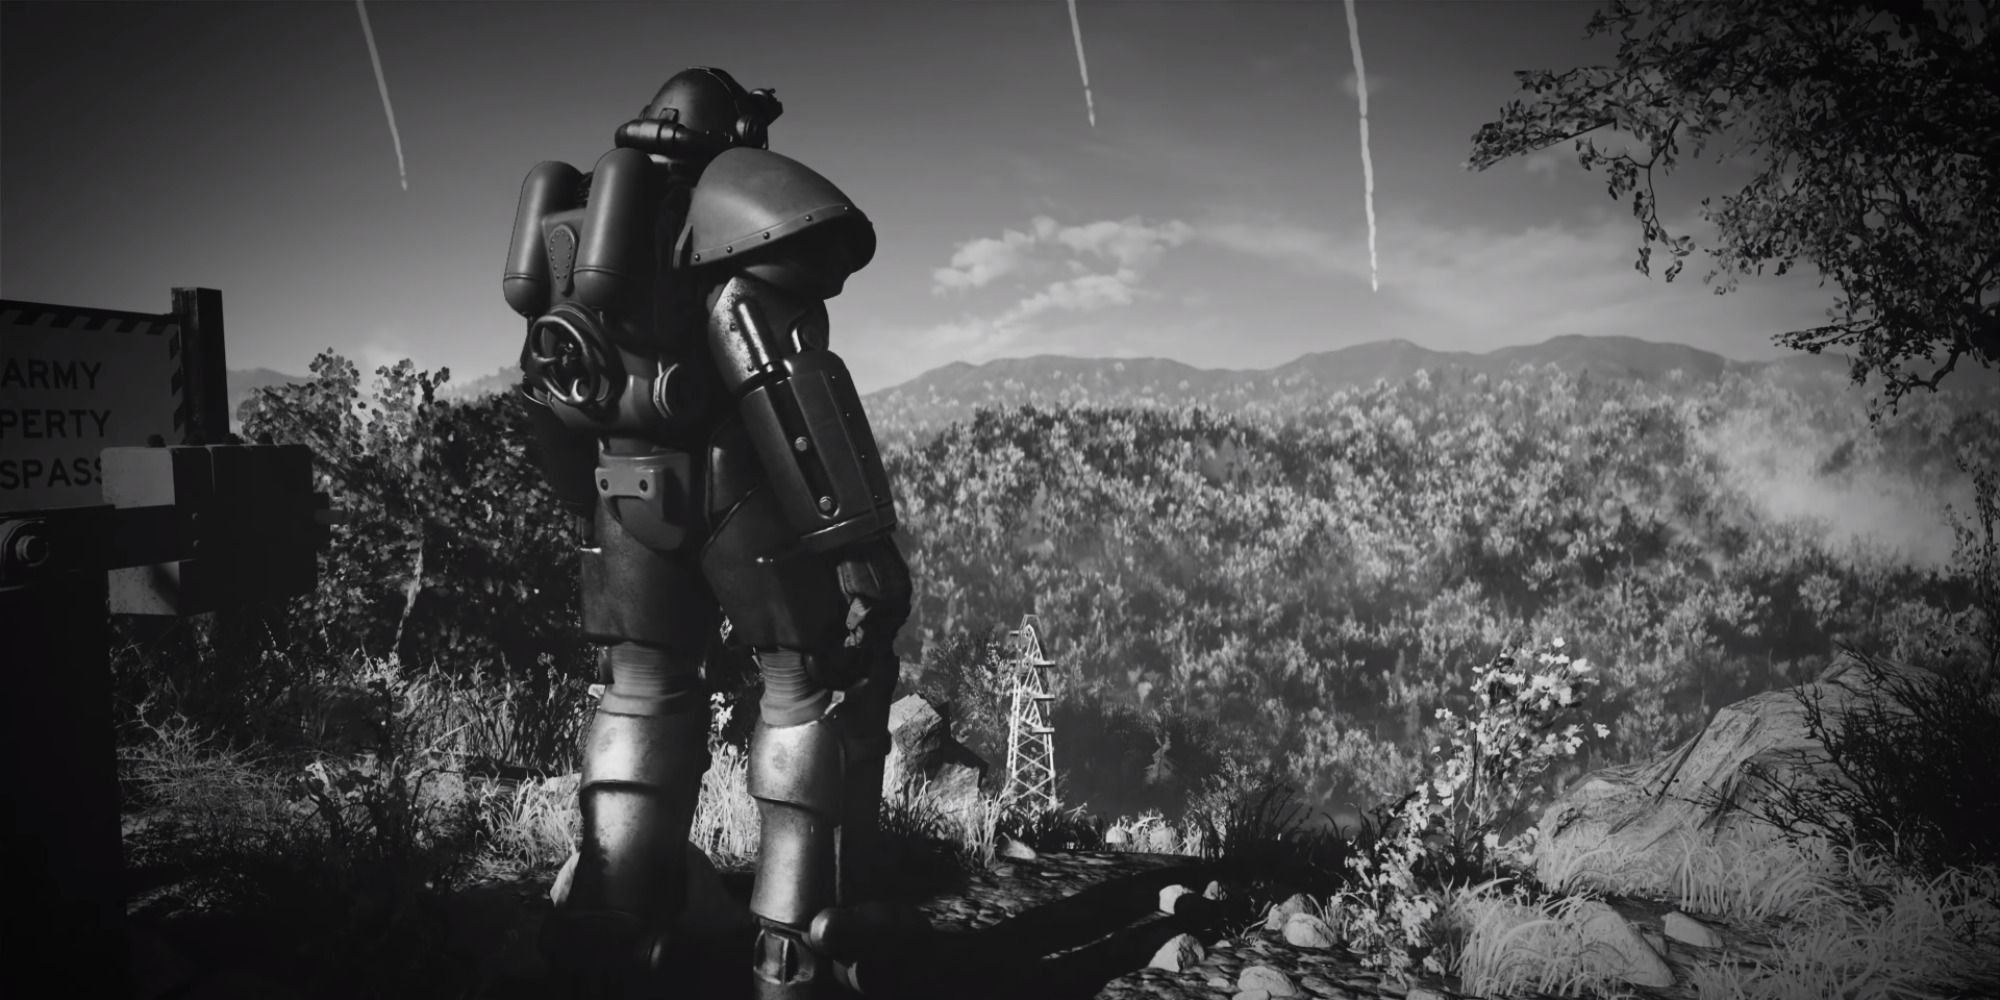 Black and white screenshot from Fallout 76 cinematic with Power Armor character standing on a hill with bombs dropping in the background